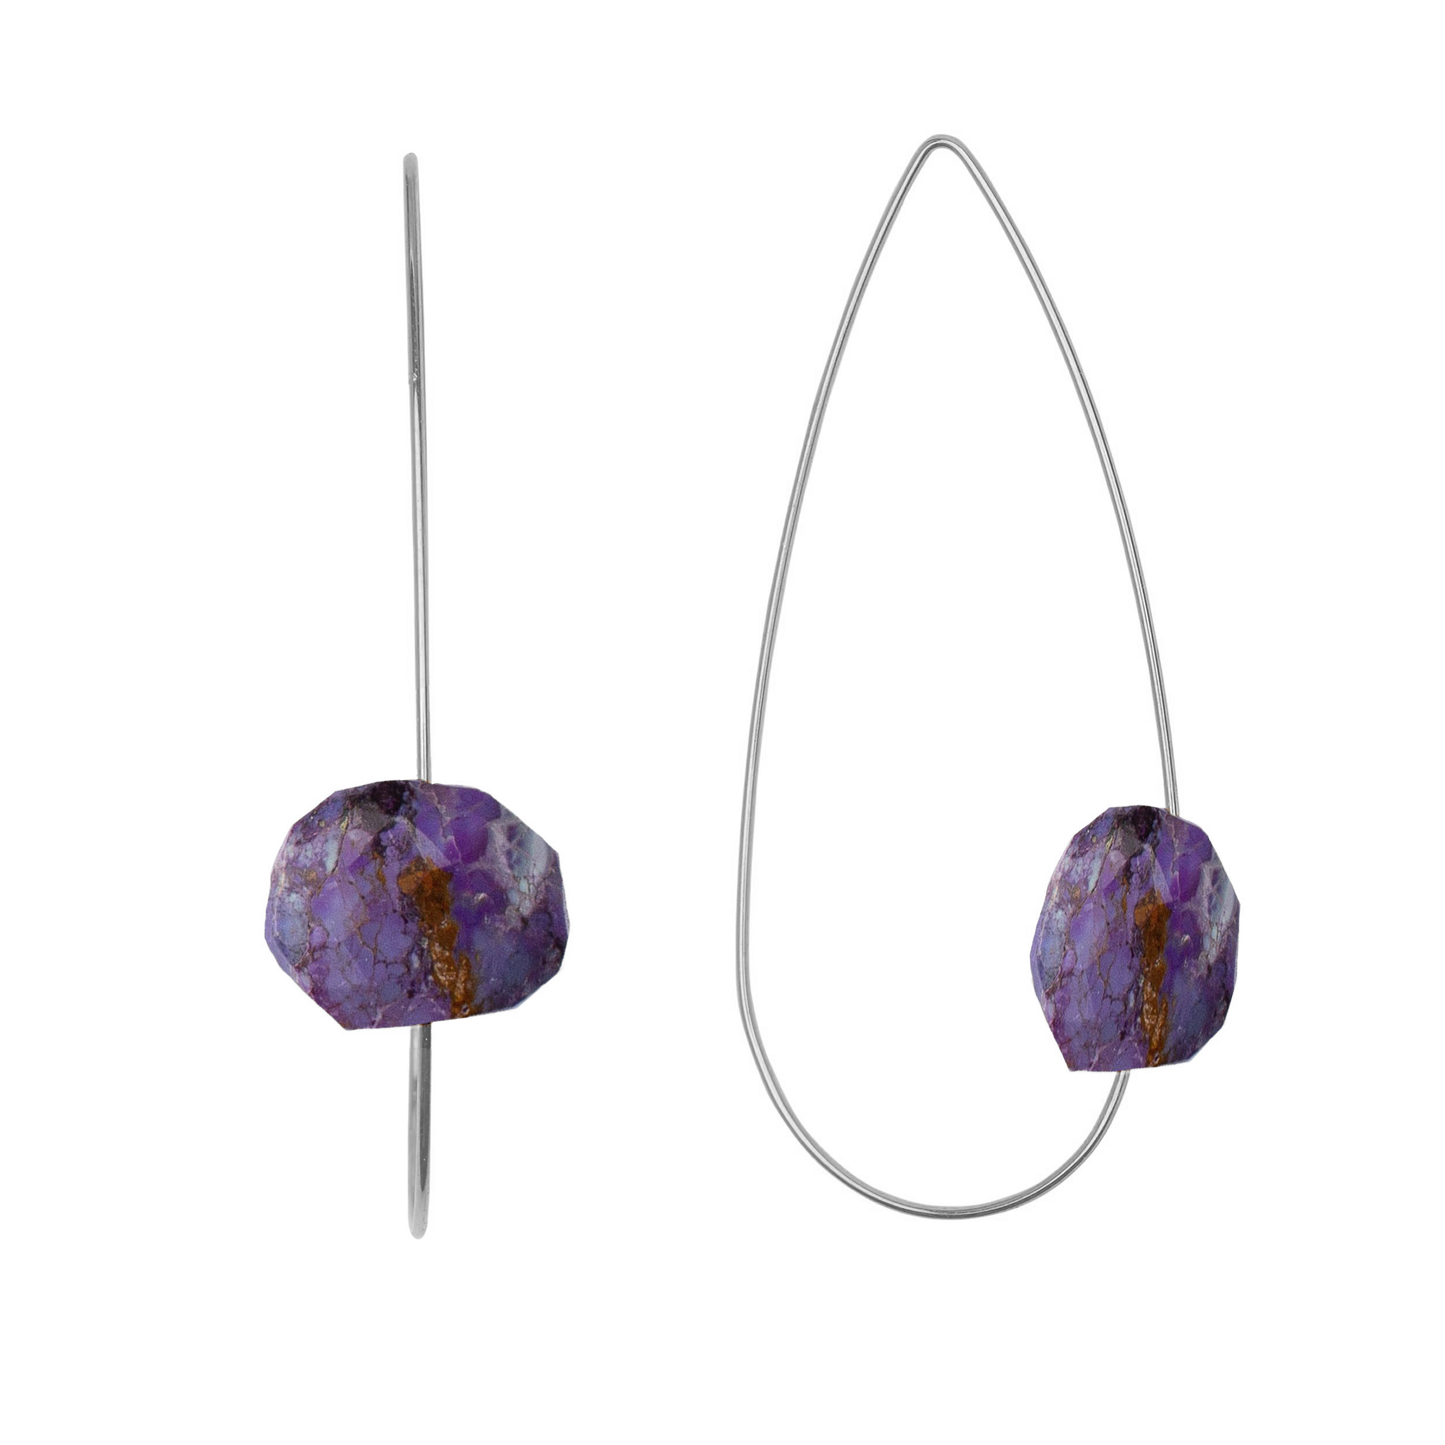 Pointed Drop Earrings with Gemstones - more fabulous colours